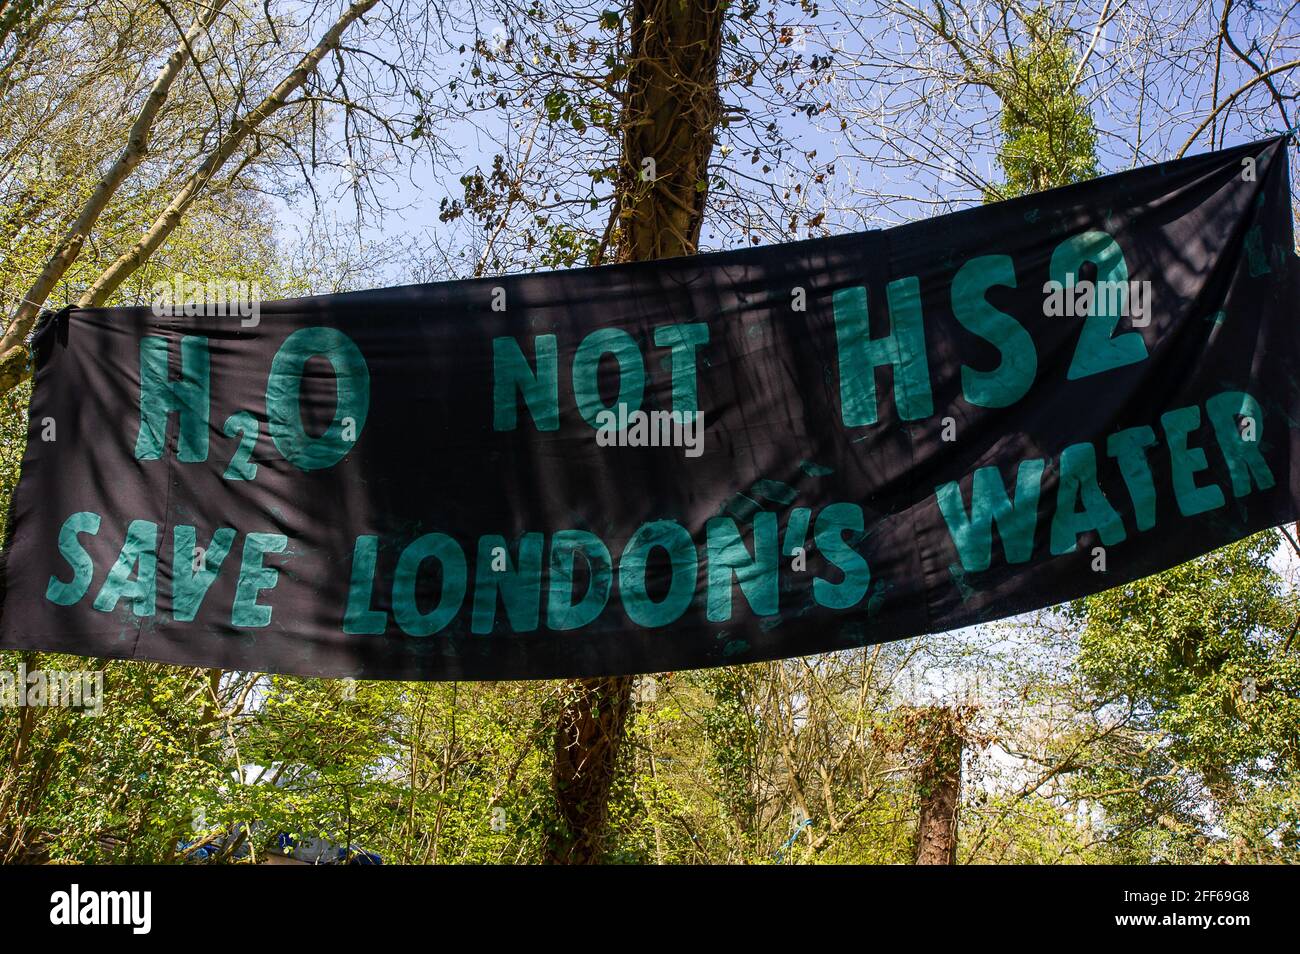 Denham, Buckinghamshire, UK. 24th April, 2021. An H2O not HS2, Save London's Water banner at the Stop HS2 protest camp in Denham Country Park. Stop HS2 activists have grave concerns about the potential risk HS2 may cause to London's drinking water by drilling into the aquifer. The High Speed Rail link from London to Birmingham puts 693 wildlife sites, 108 ancient woodlands and 33 SSSIs at risk. Credit: Maureen McLean/Alamy Stock Photo